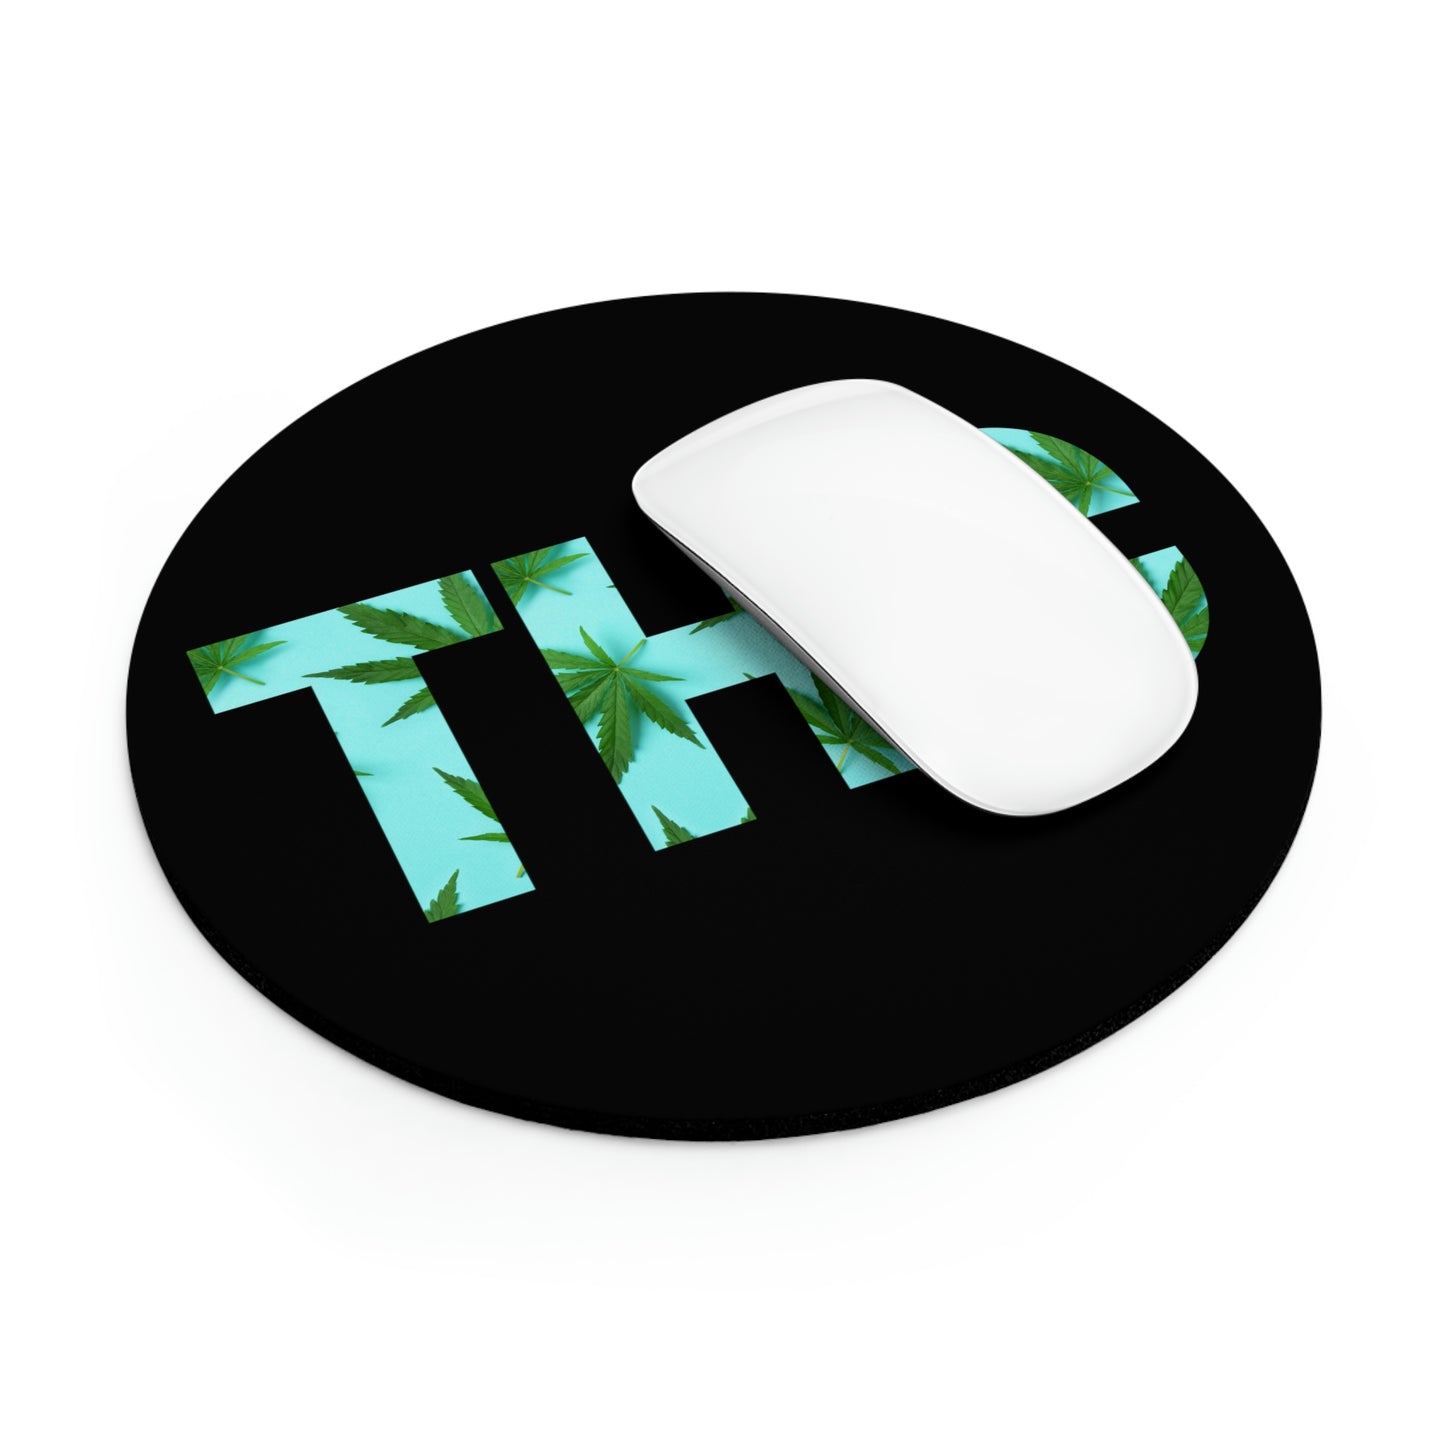 a Turquoise THC Mouse Pad with marijuana leaves on it.